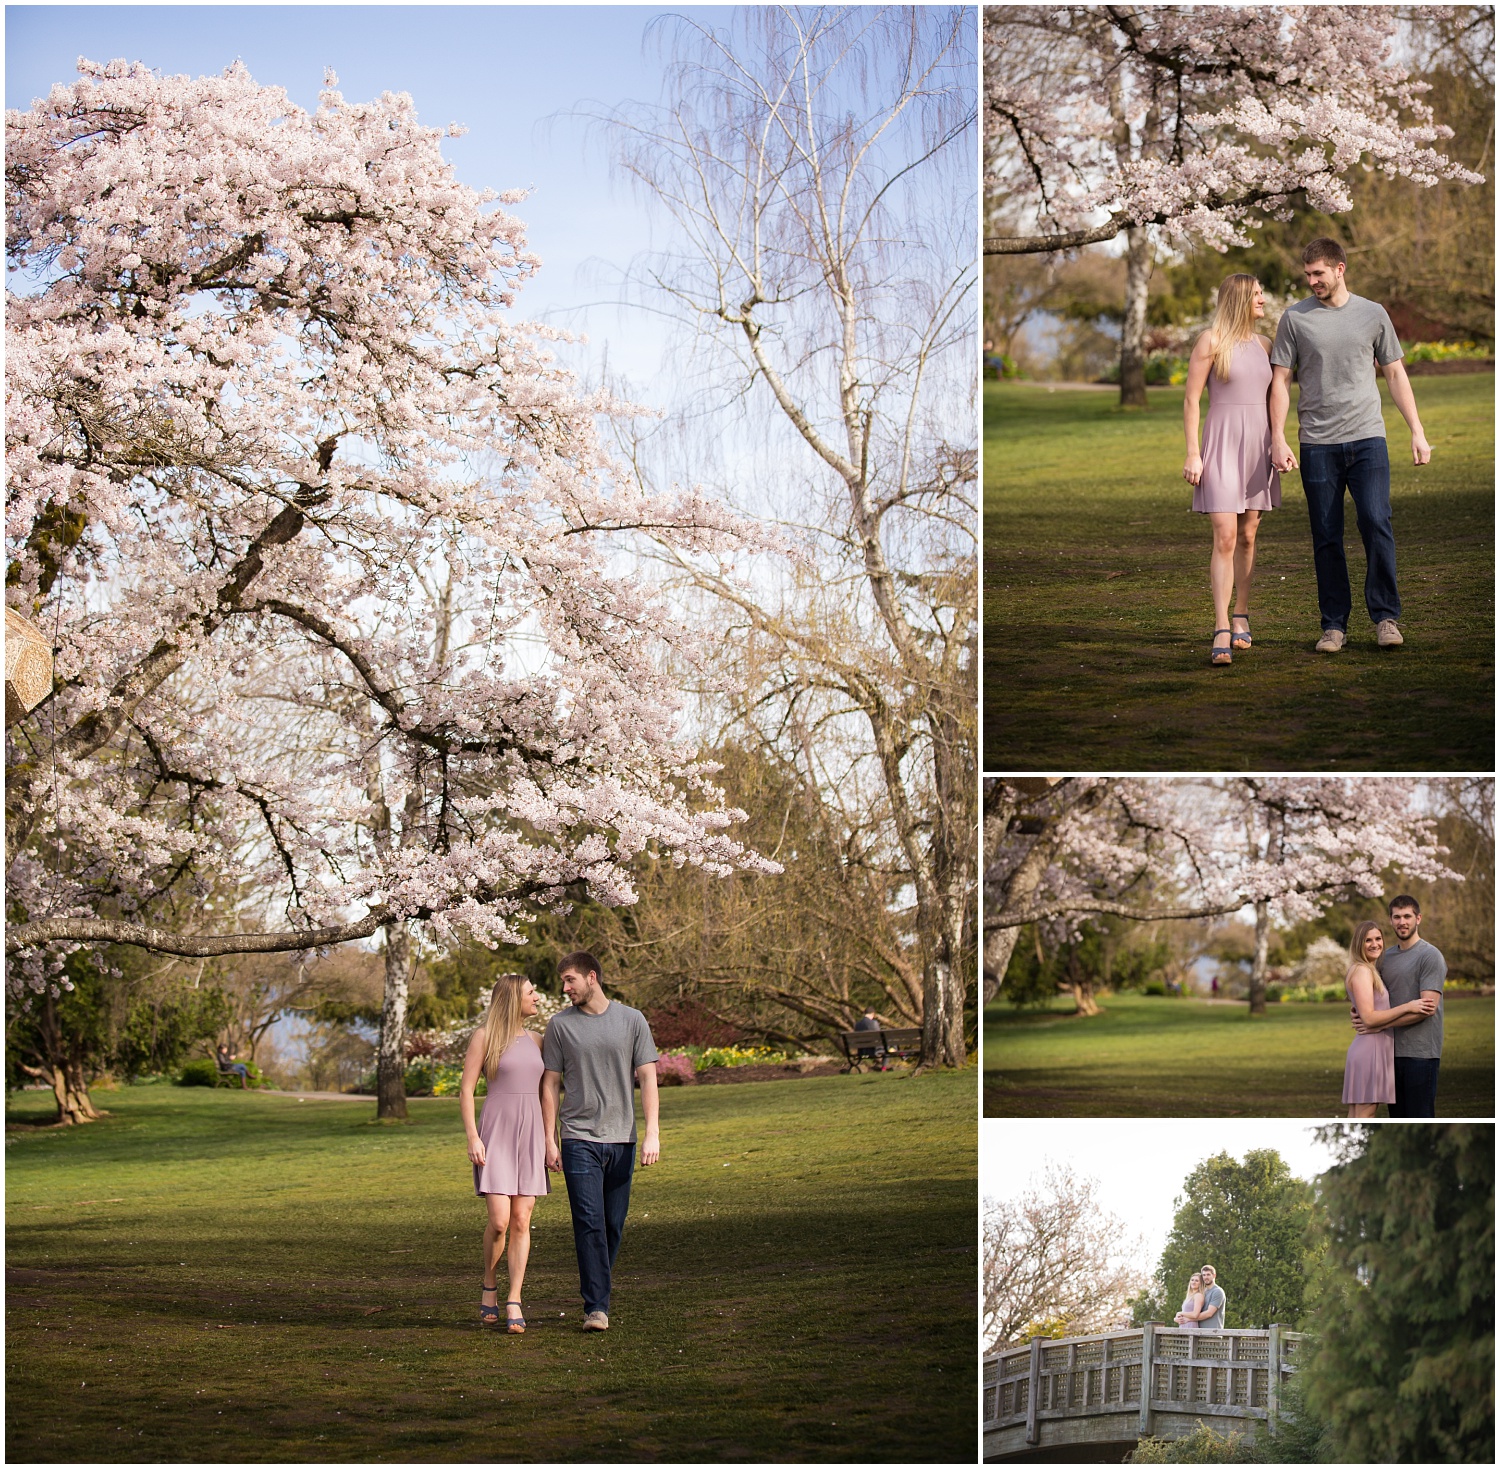 Amazing Day Photography - Cherry Blossom Engagement Session - Queen Elizabeth Park Engagement Session - Vancouver Engagement Photographer  (3).jpg